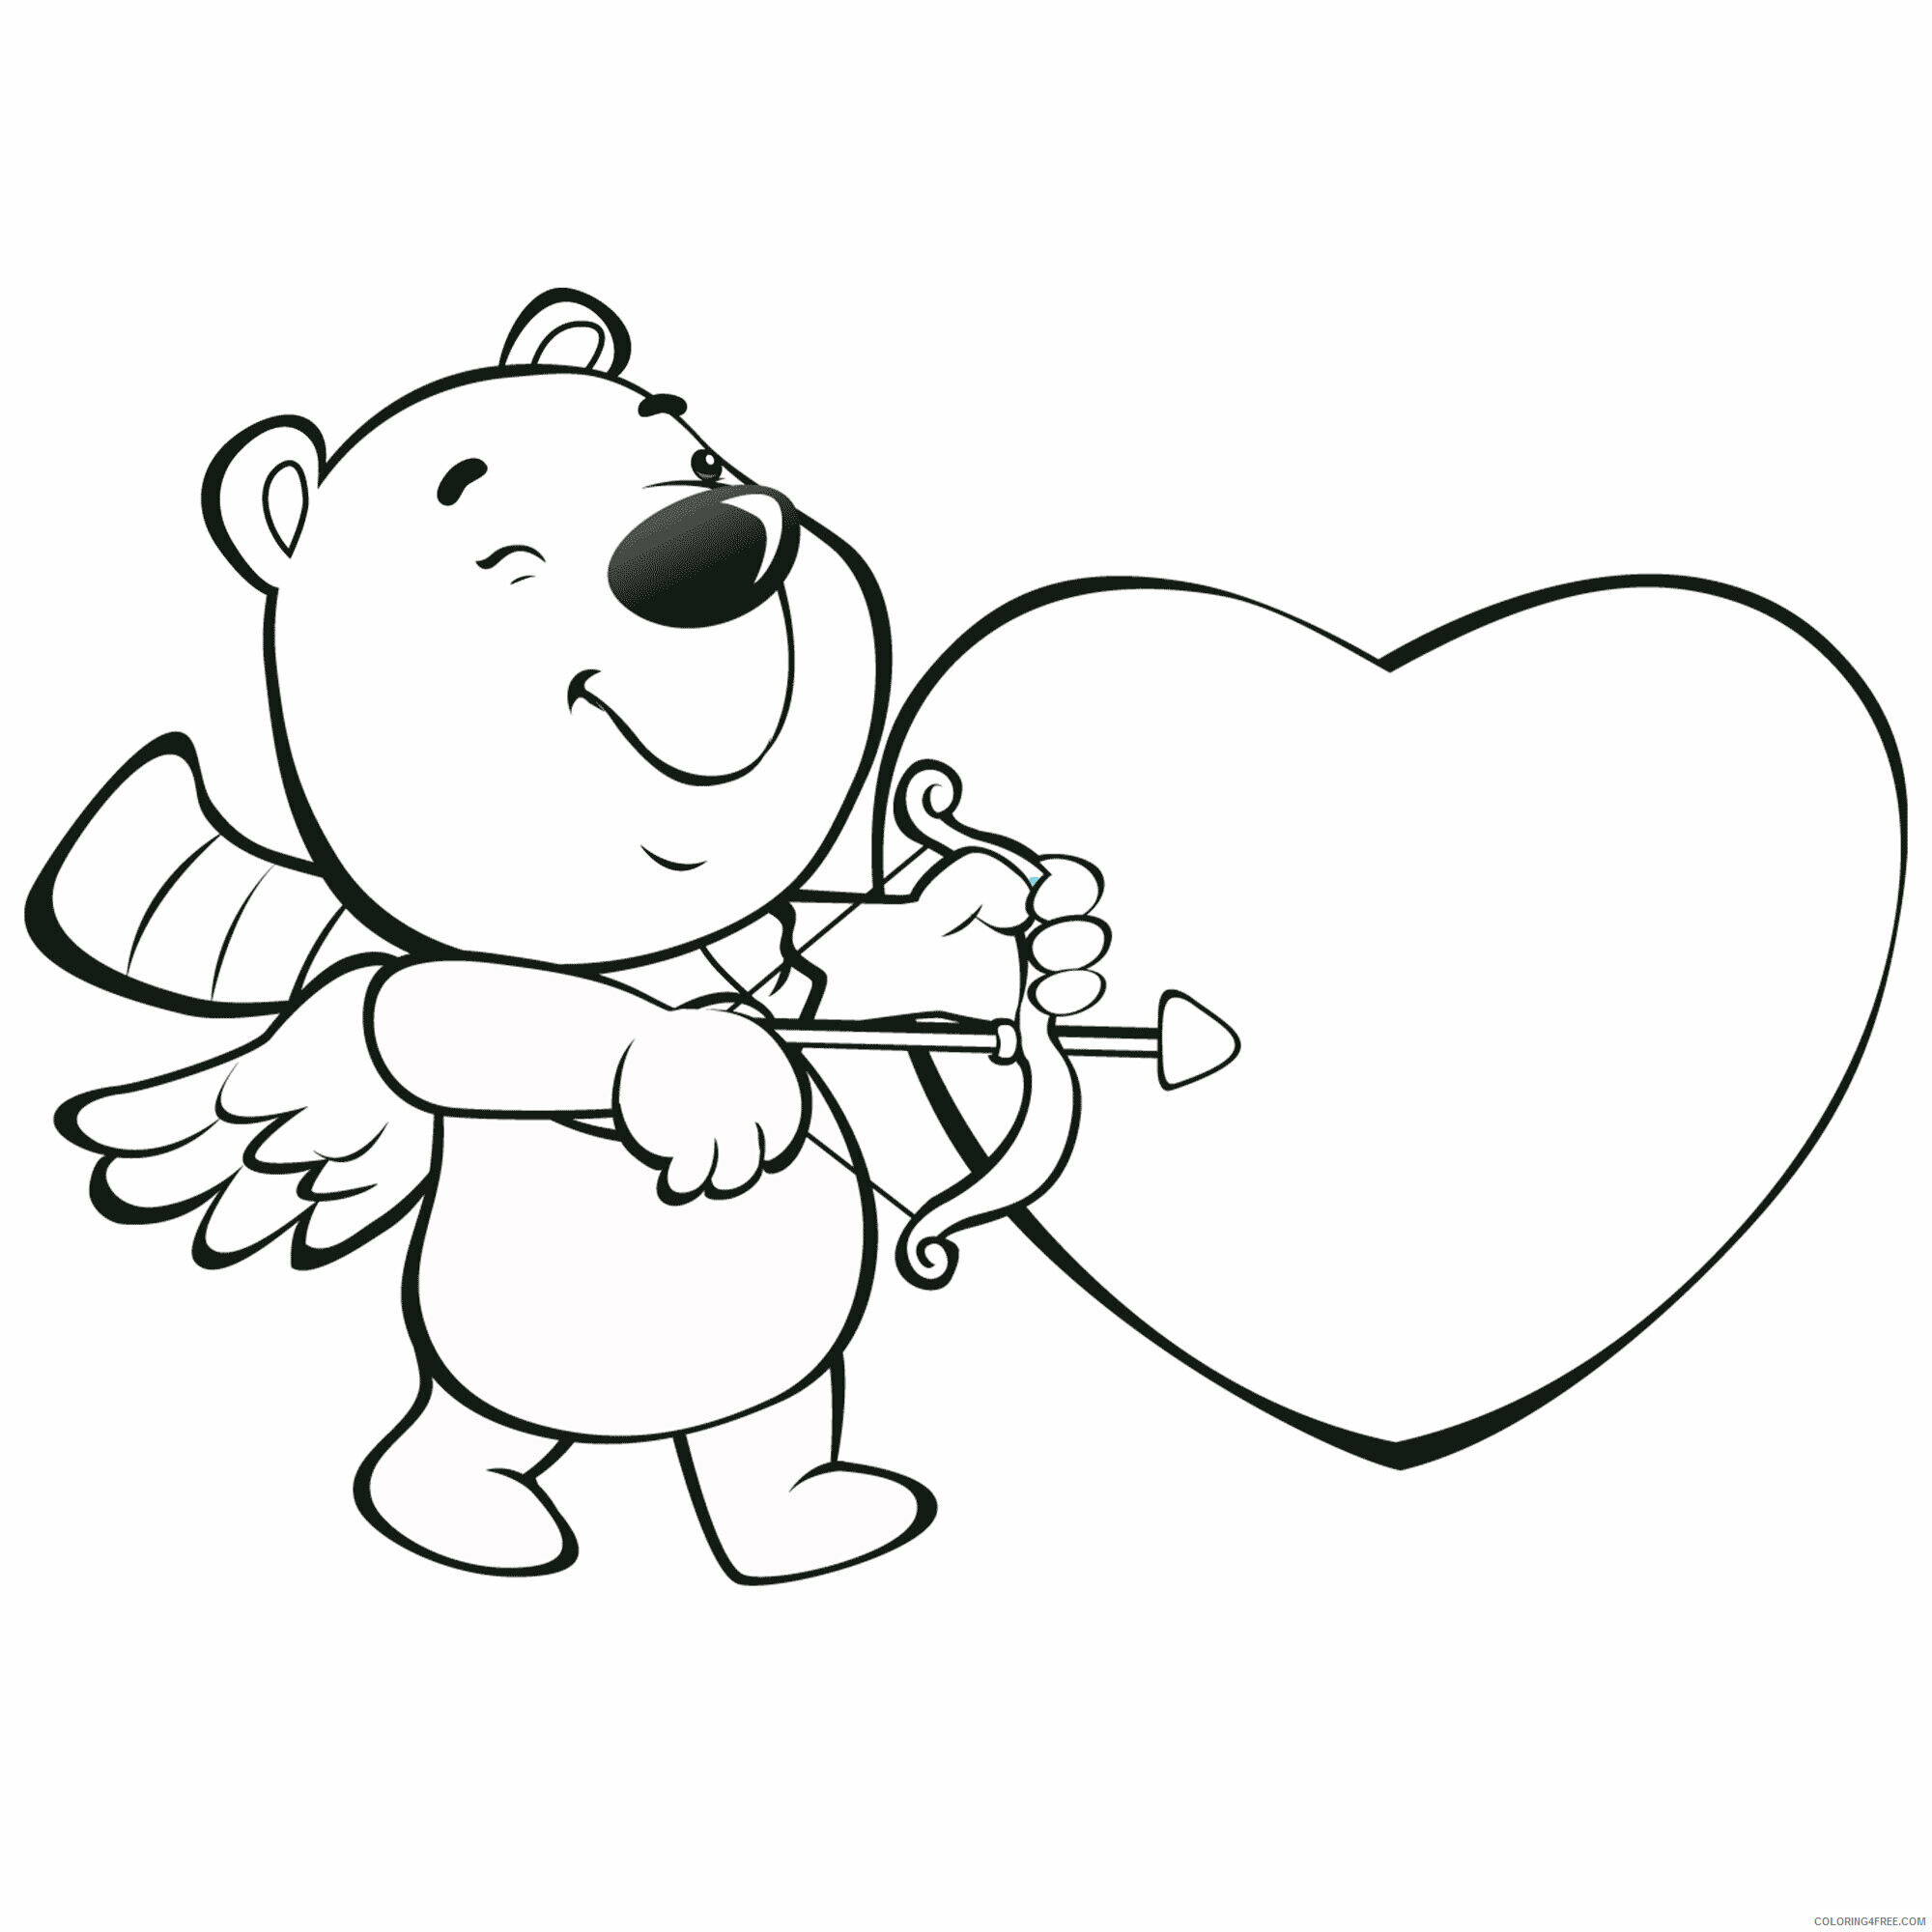 Bear Coloring Pages Animal Printable Sheets Valentine Cupid Bear 2021 0326 Coloring4free